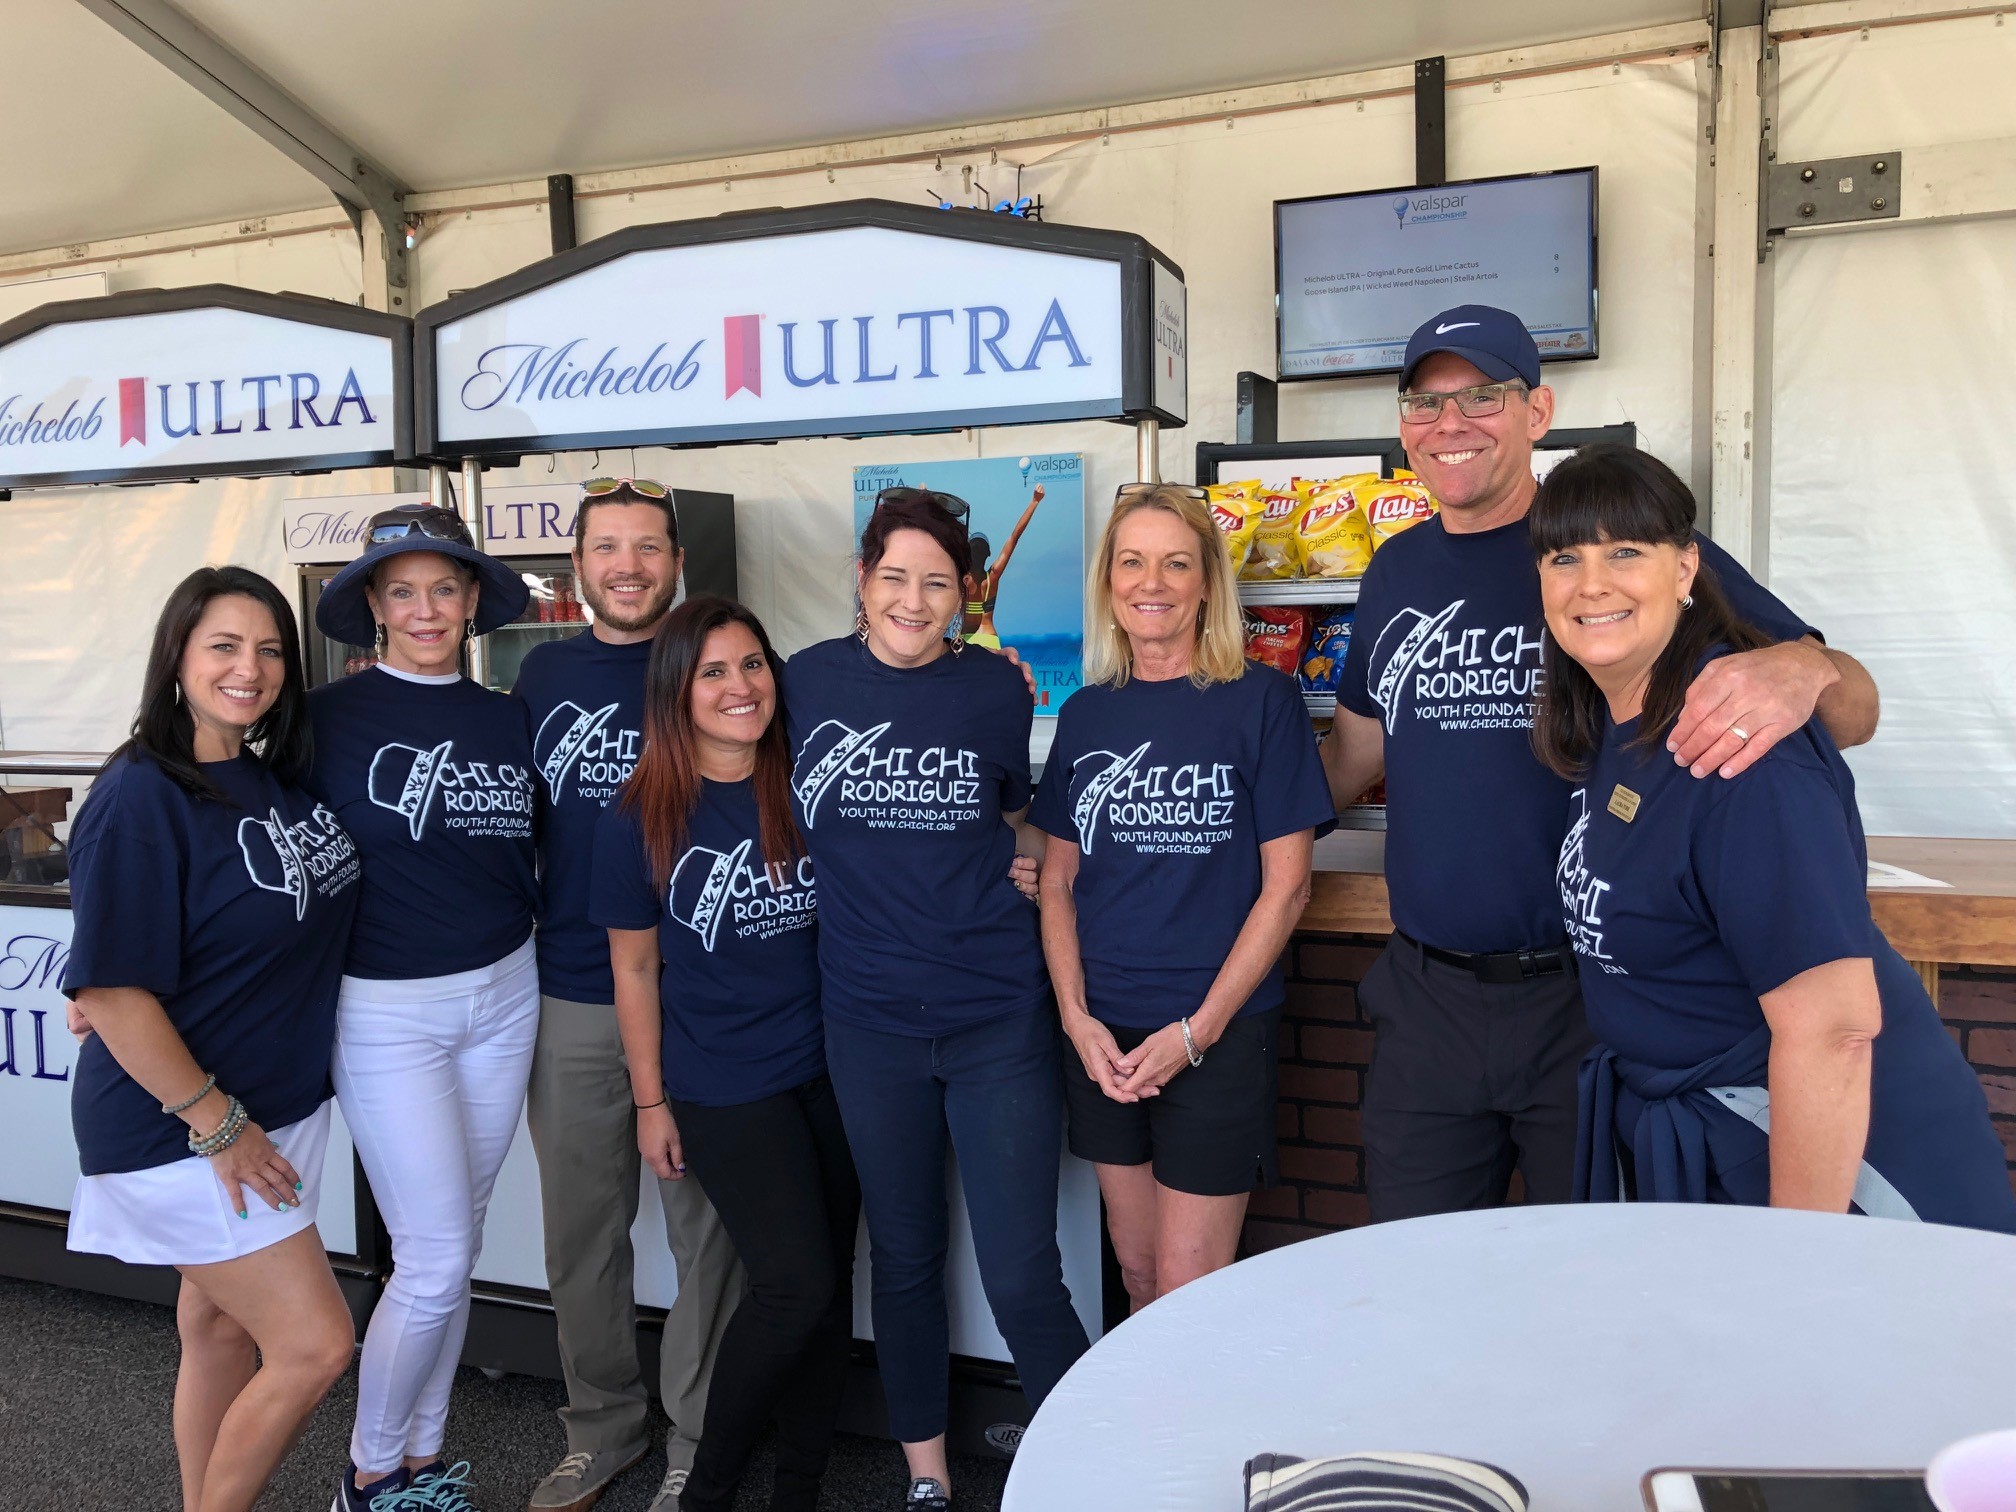 Foundation supporters volunteer at the Valspar Championship Michelob